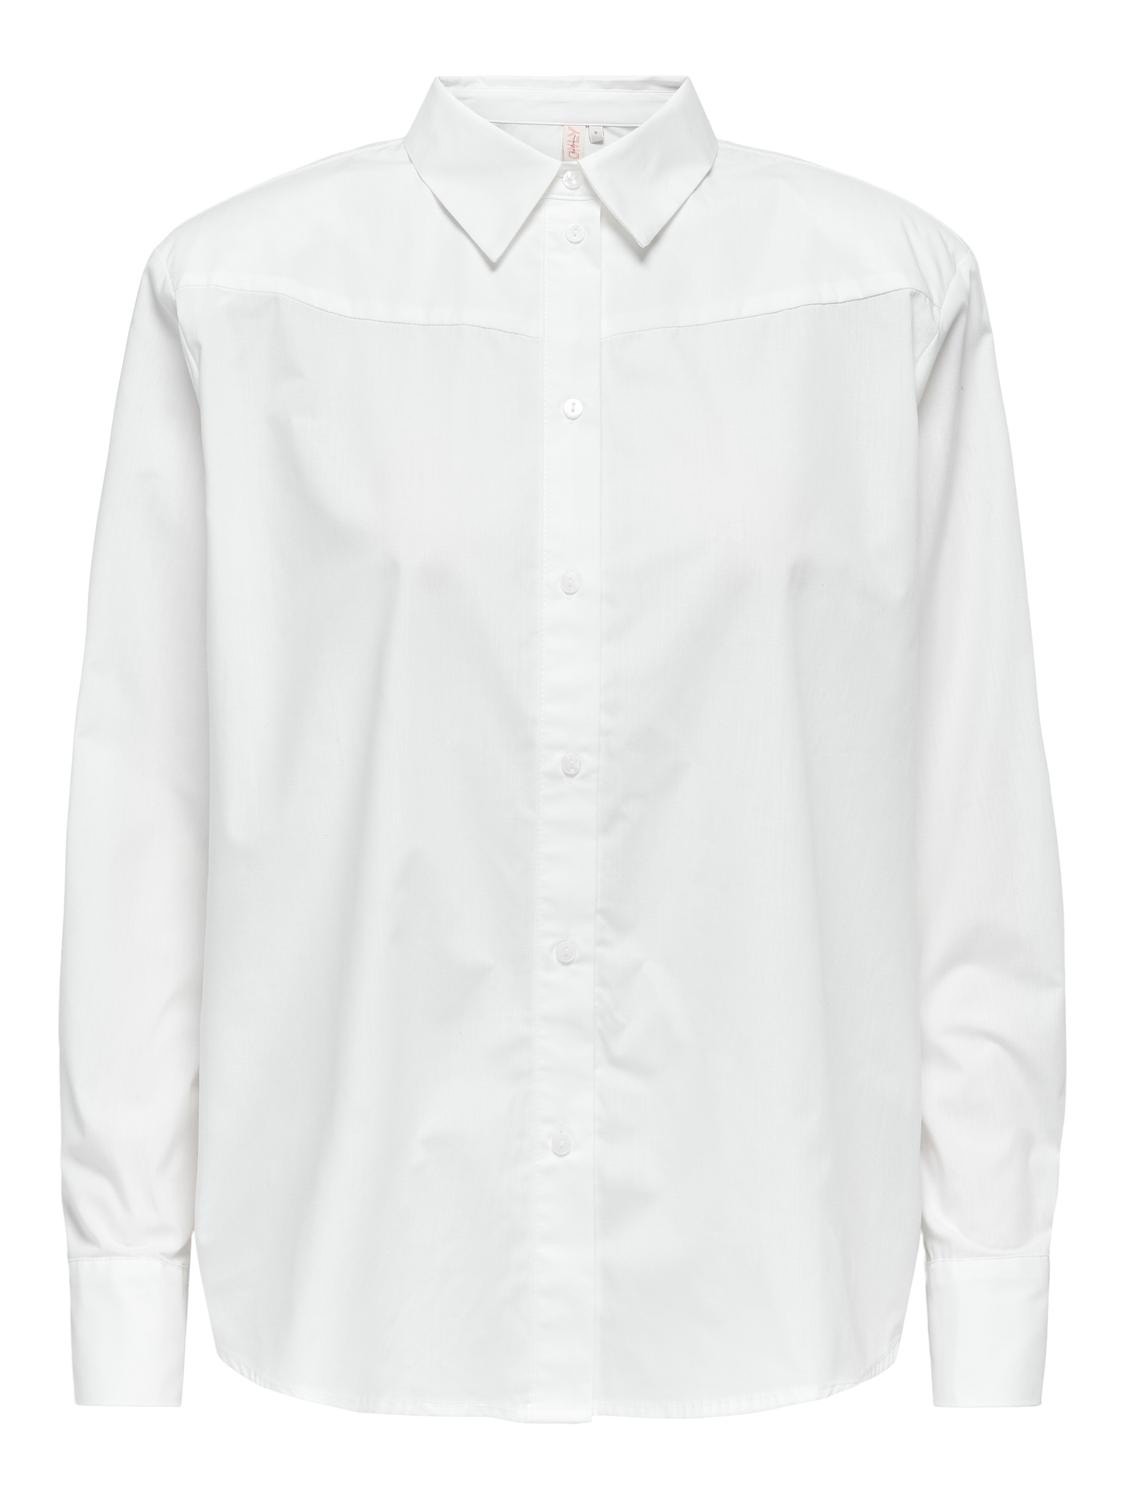 ONLY Shirt with shoulder pads -White - 15327687